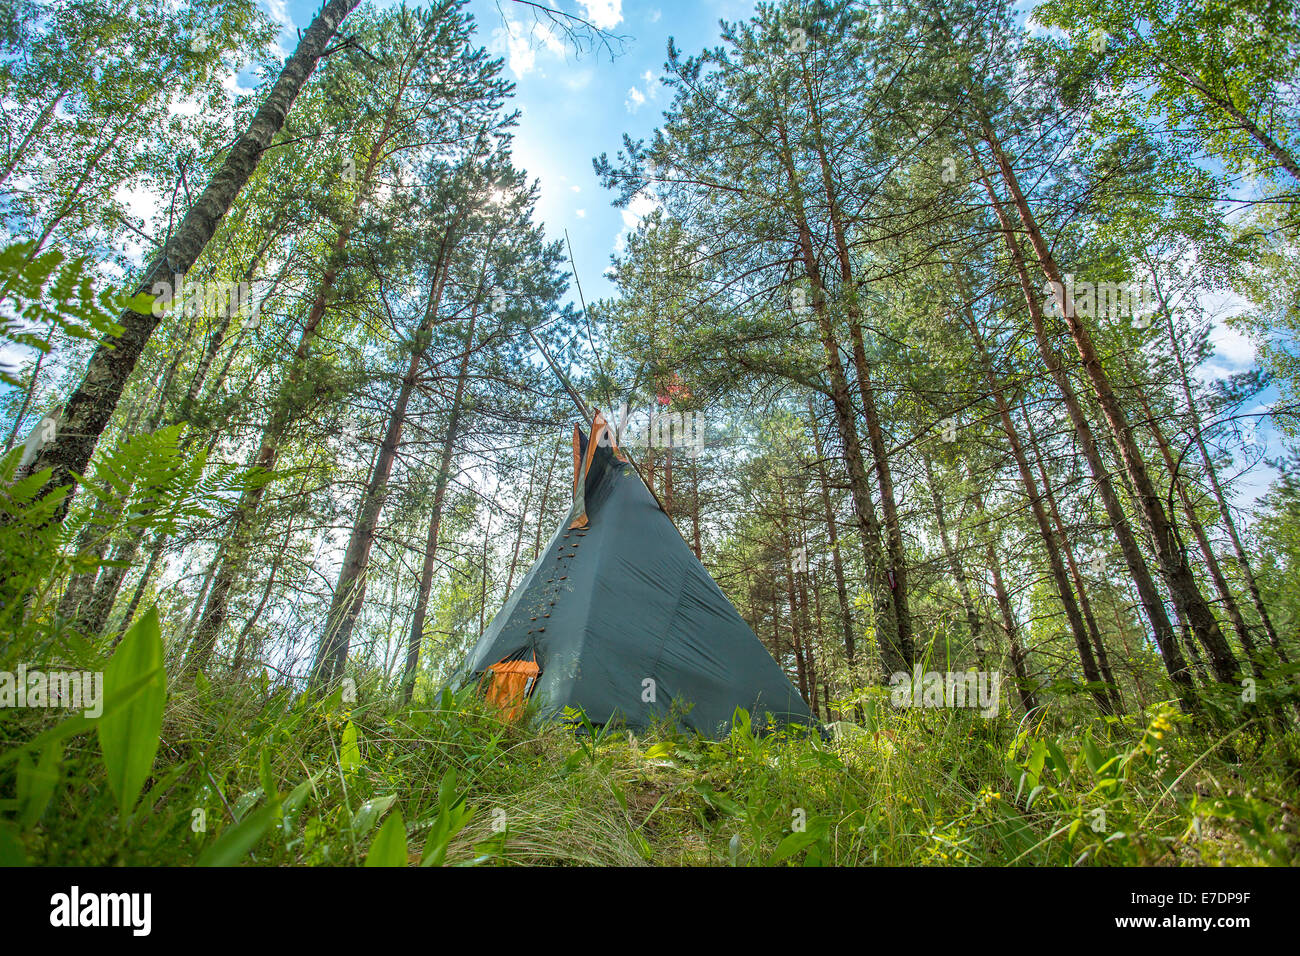 Traditional Indian tipi (teepee) house in the forest Stock Photo